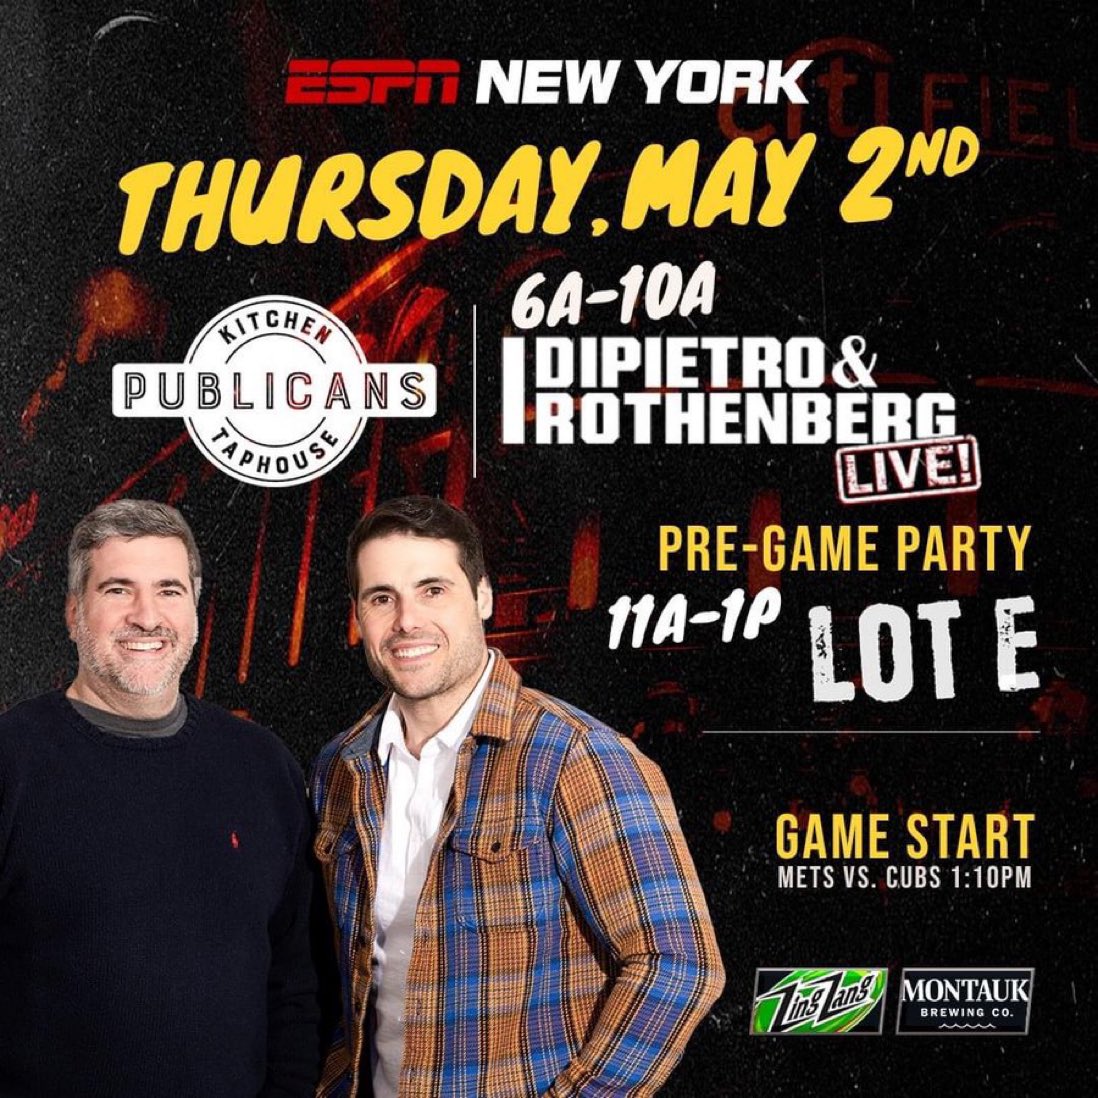 The 2nd Annual @DRonESPN Pregame Party is coming up on Thursday, May 2nd! Come out to see the LIVE broadcast at Publicans, just steps away from the LIRR, then take the train with the crew to Citi Field for the game vs. the Cubs! BROUGHT TO YOU BY: @montaukbrewco & @ZingZangMix